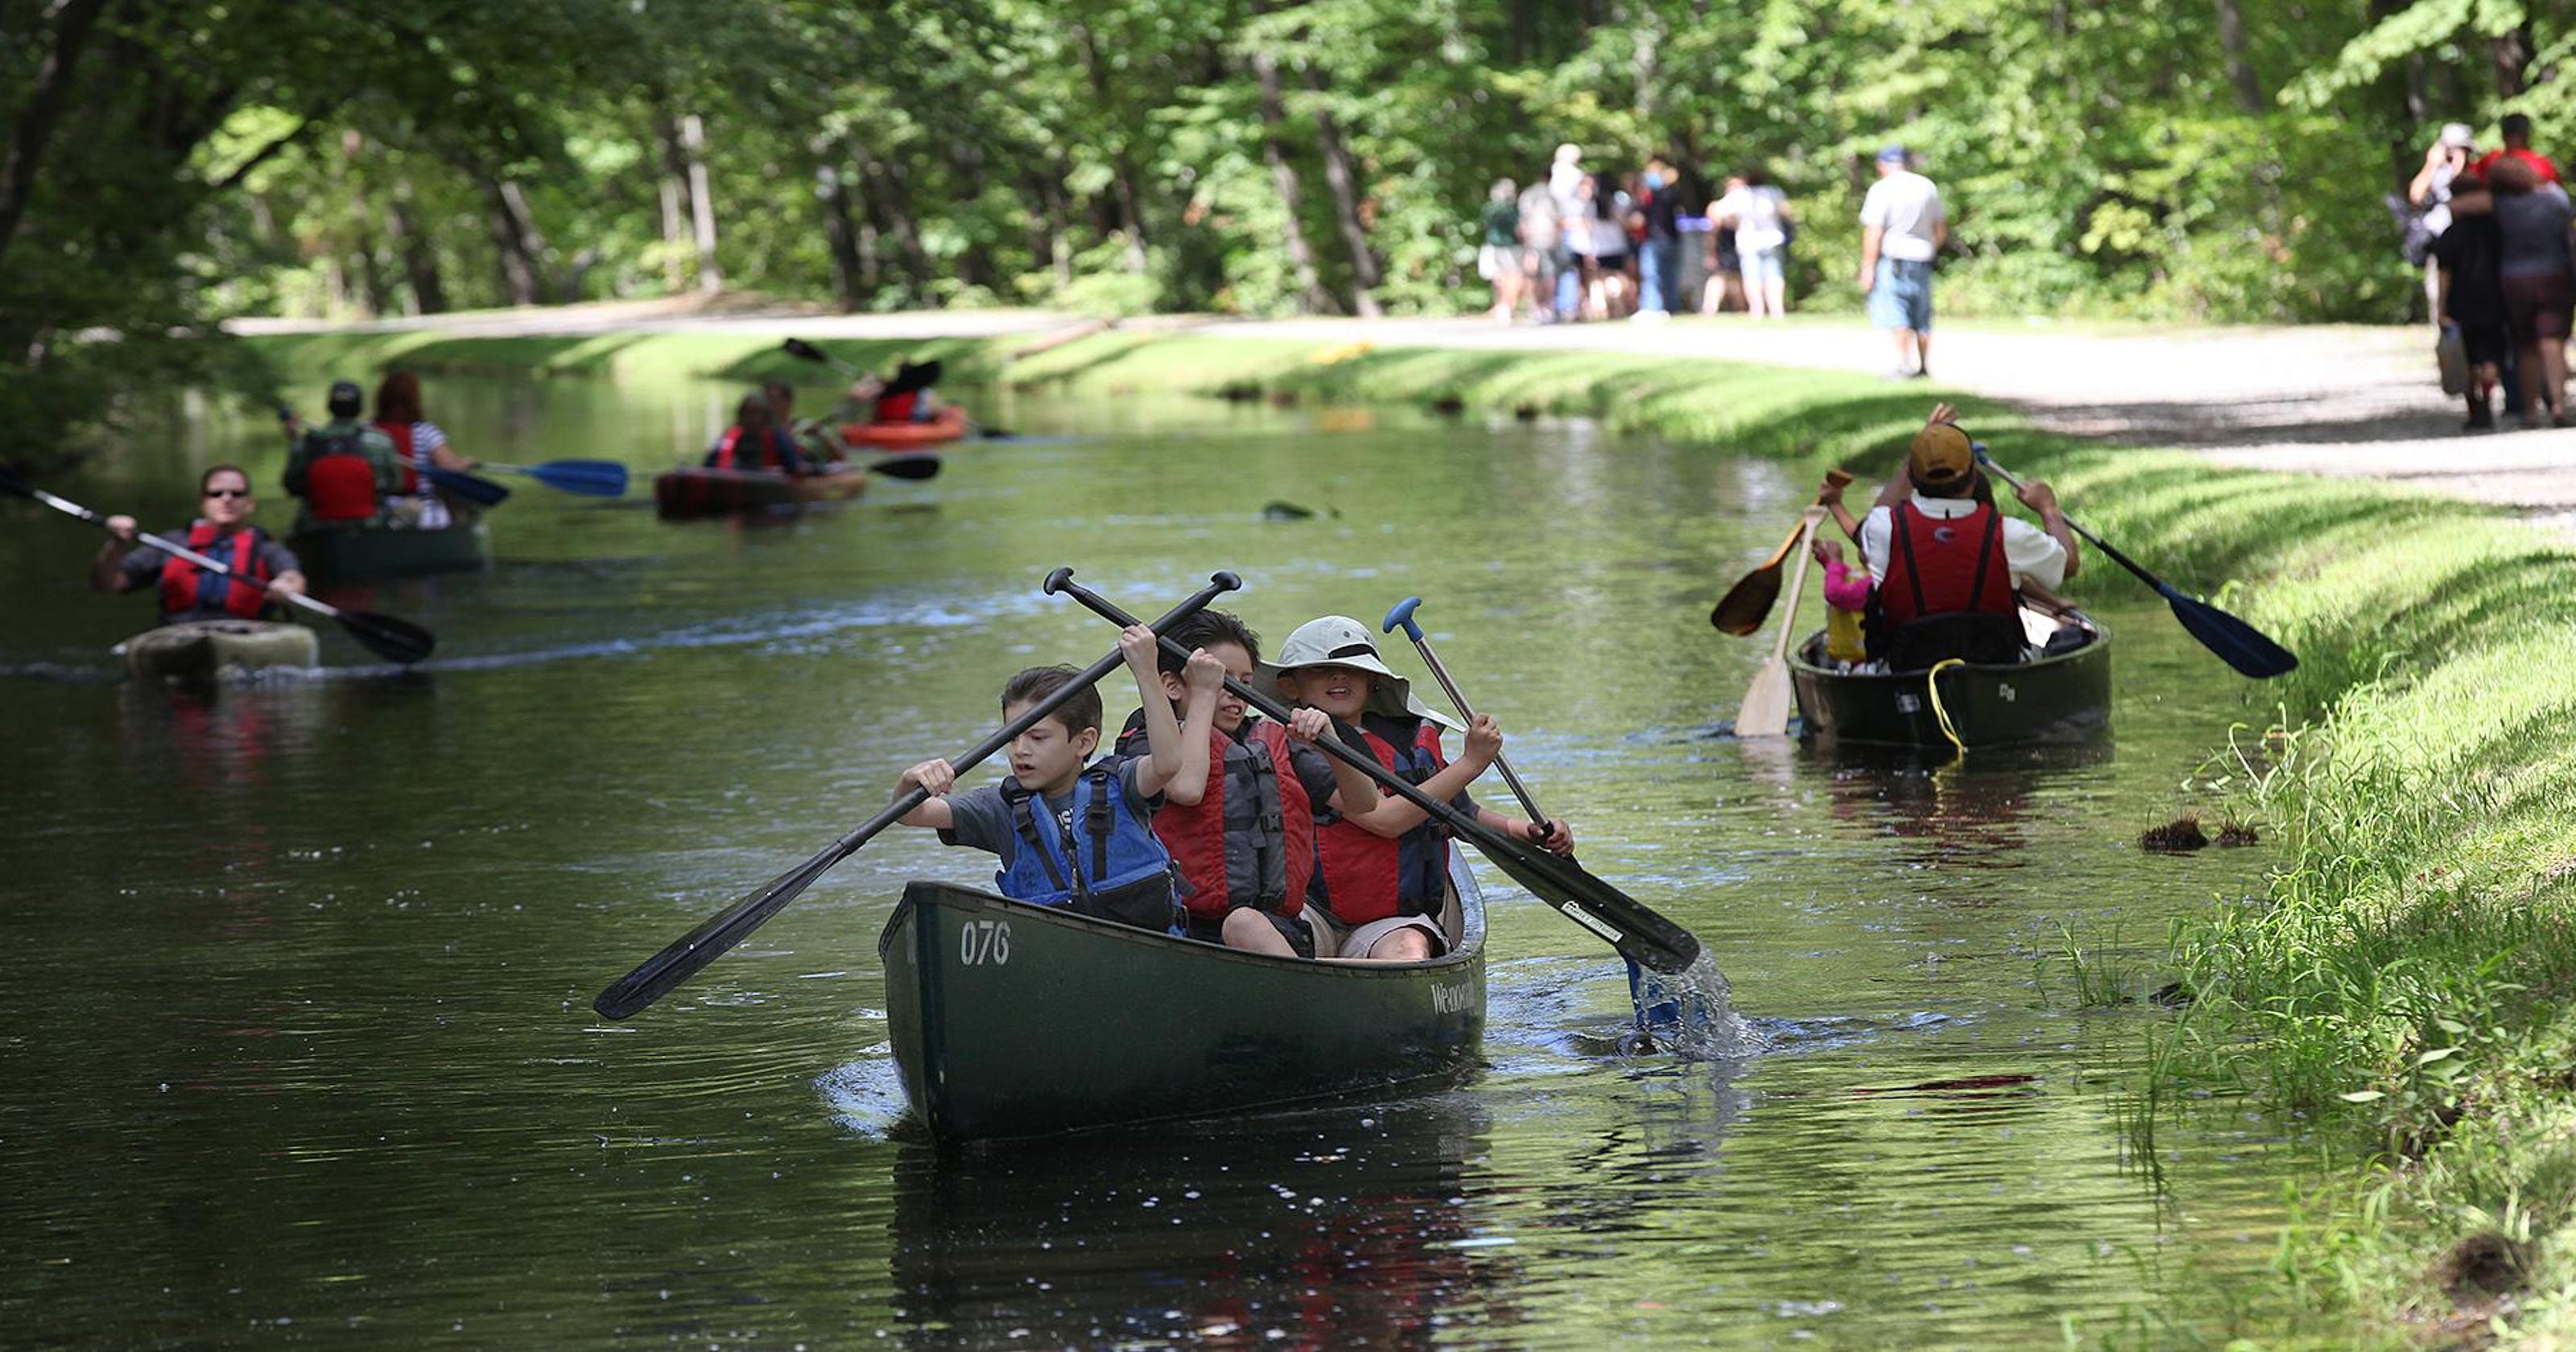 Canal Day in Wharton offers history, festival